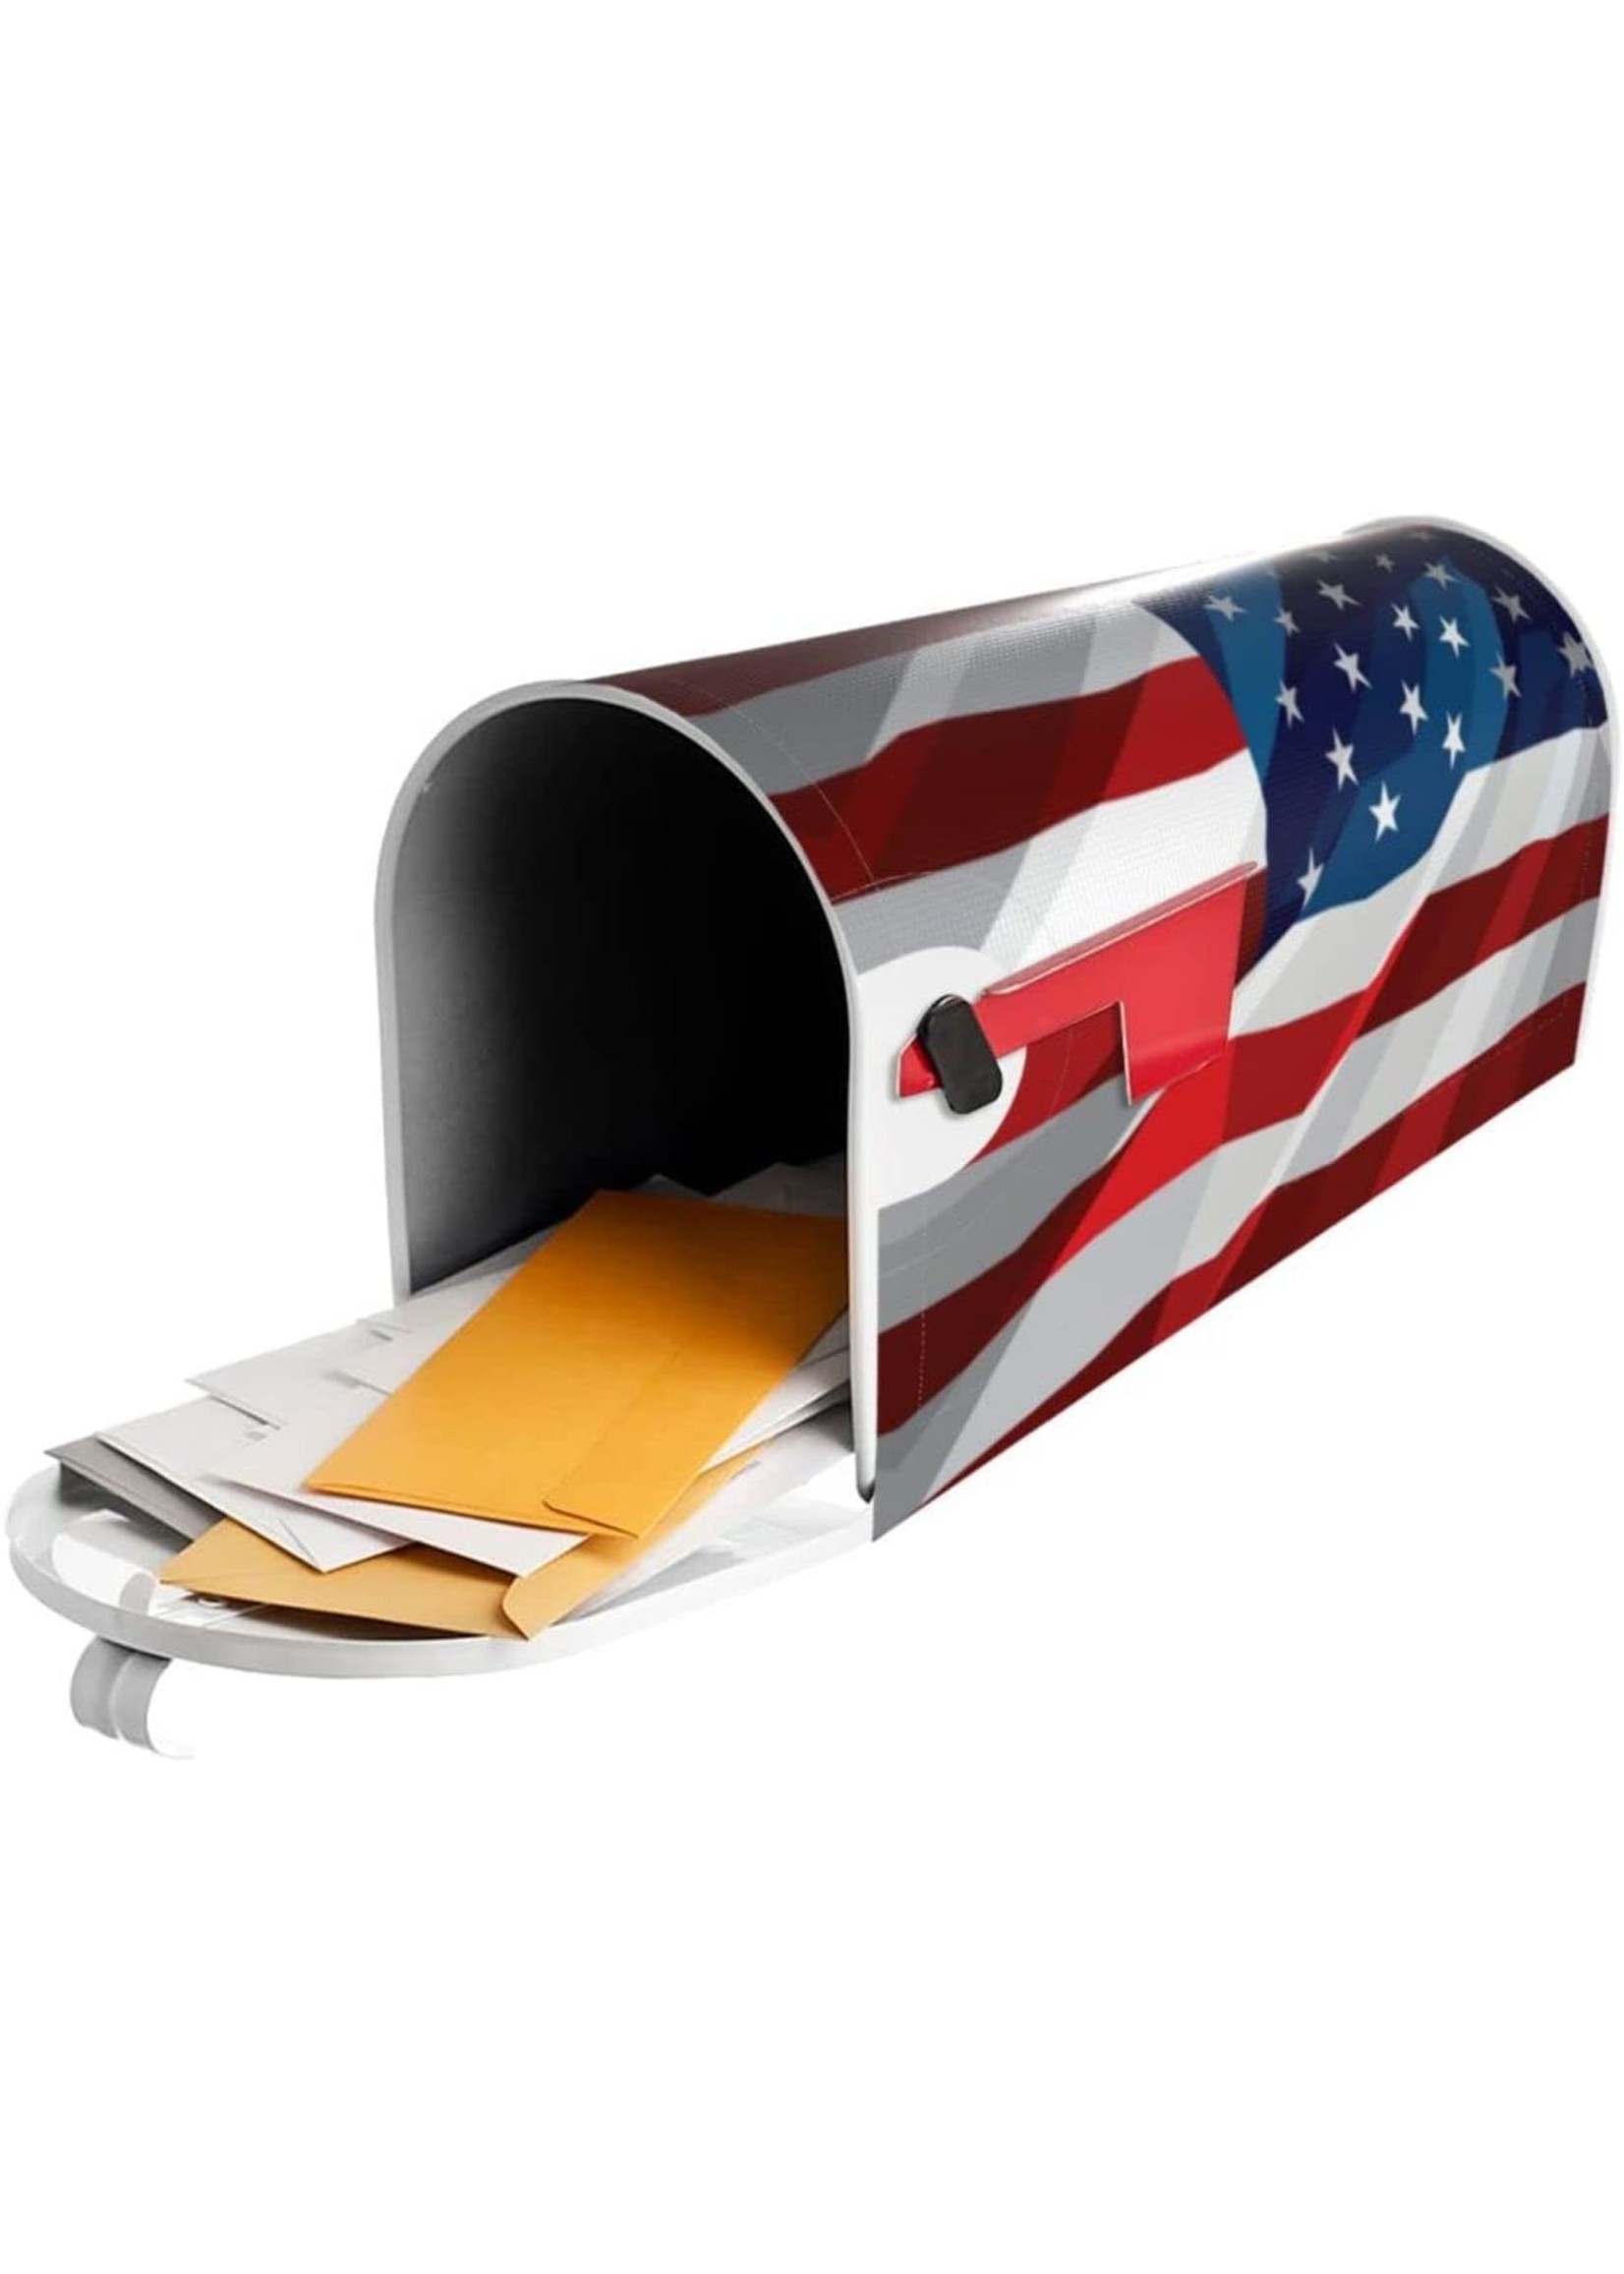 American Flag Mailbox Cover